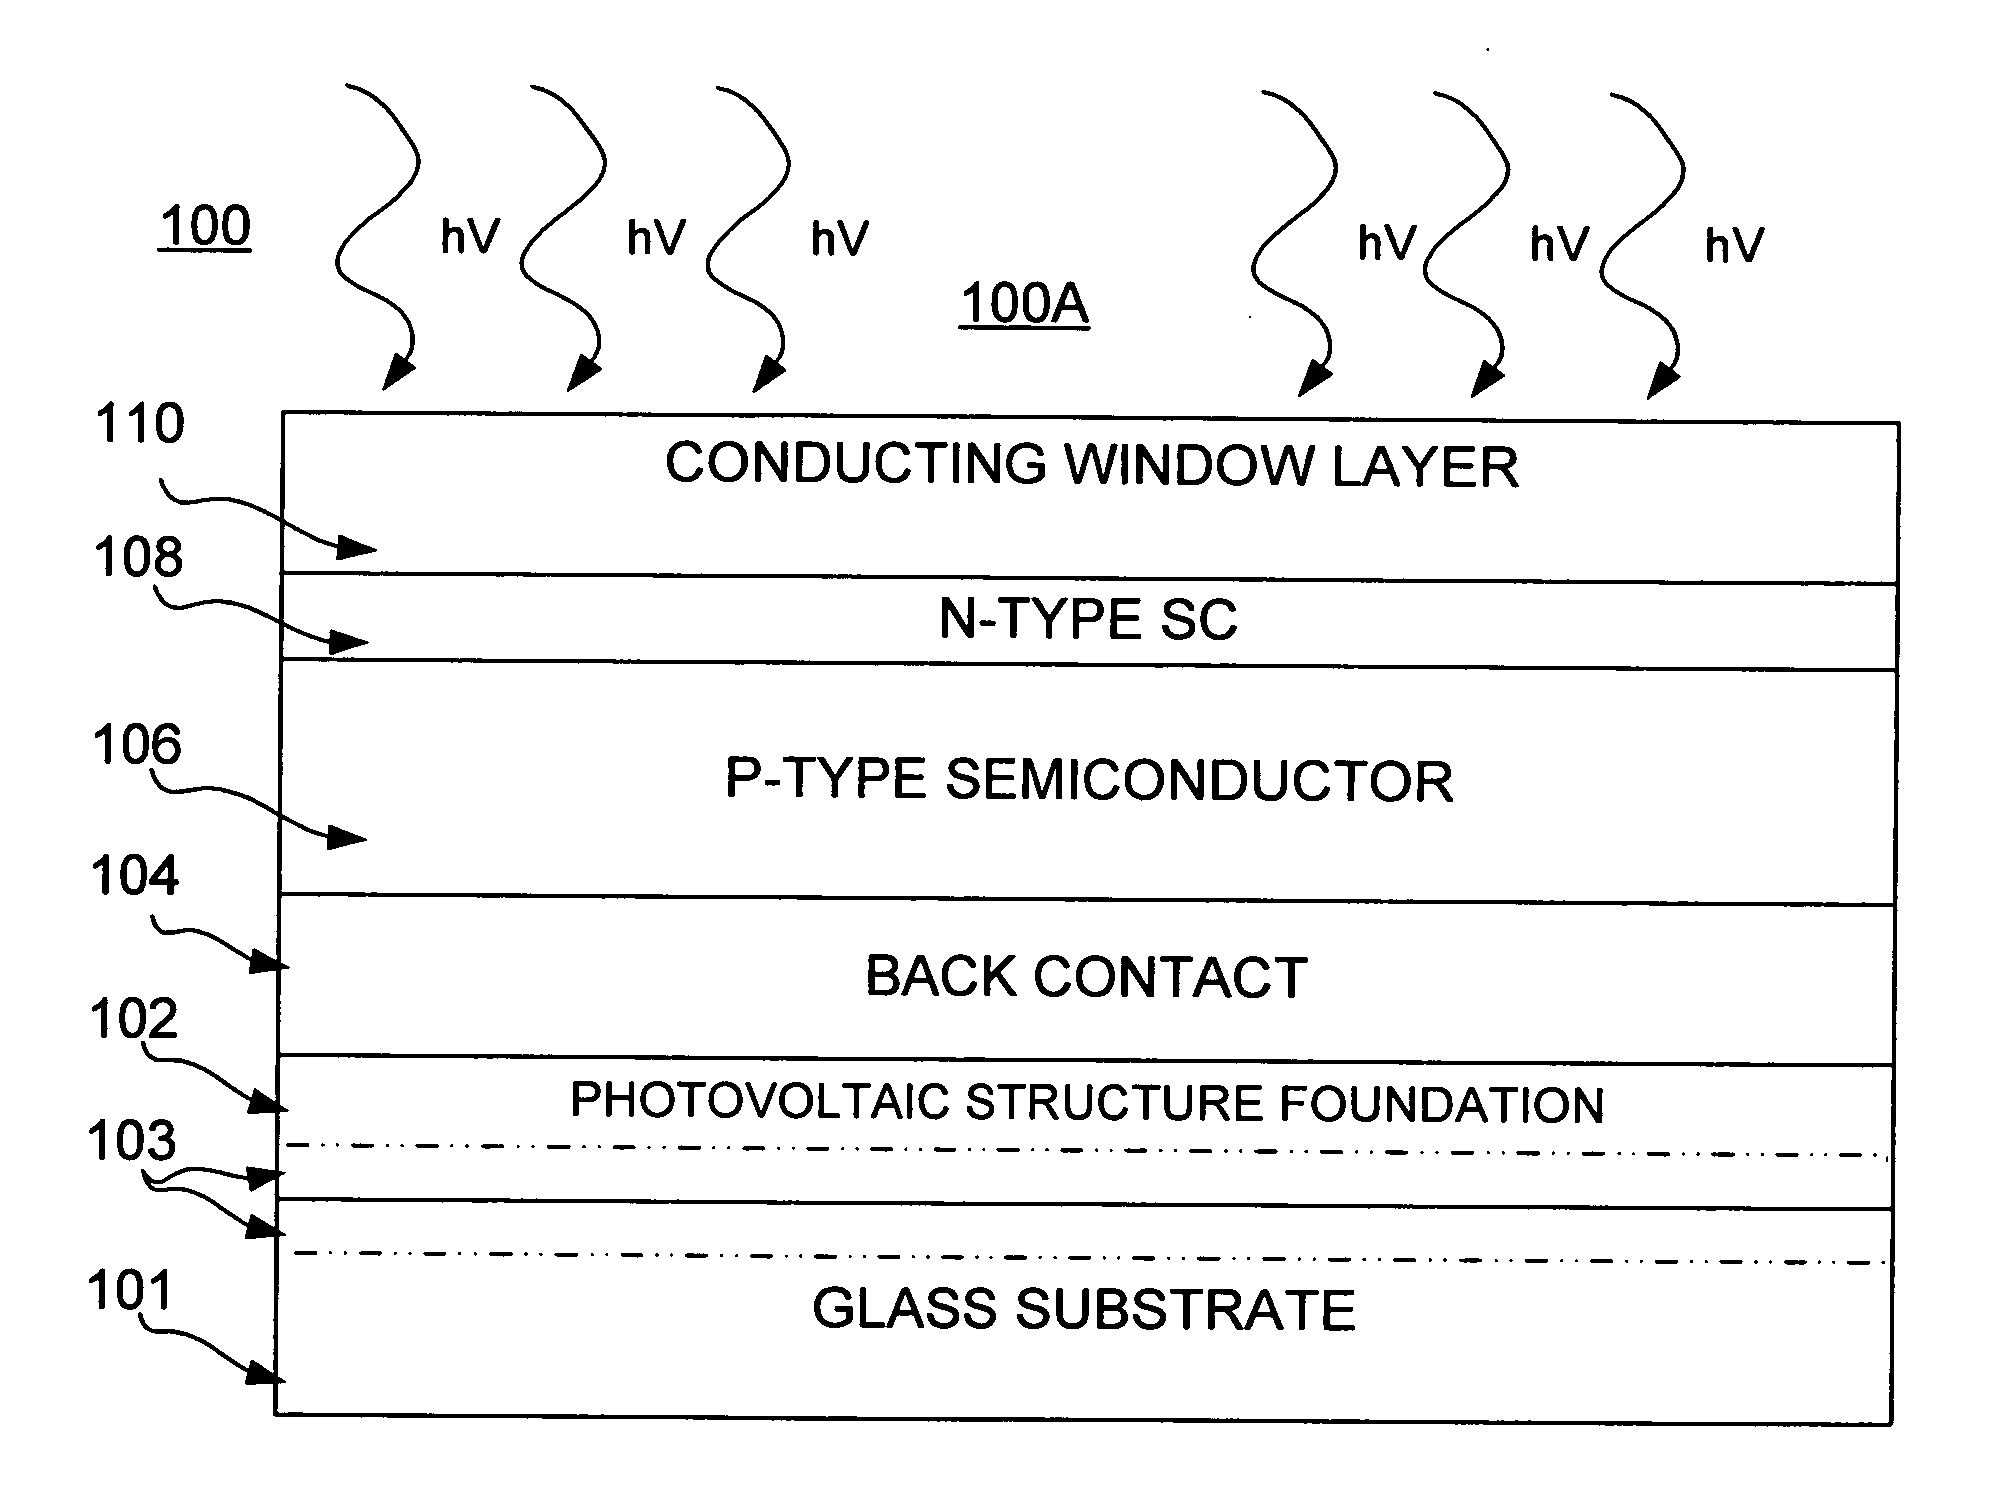 Thin film photovoltaic structure